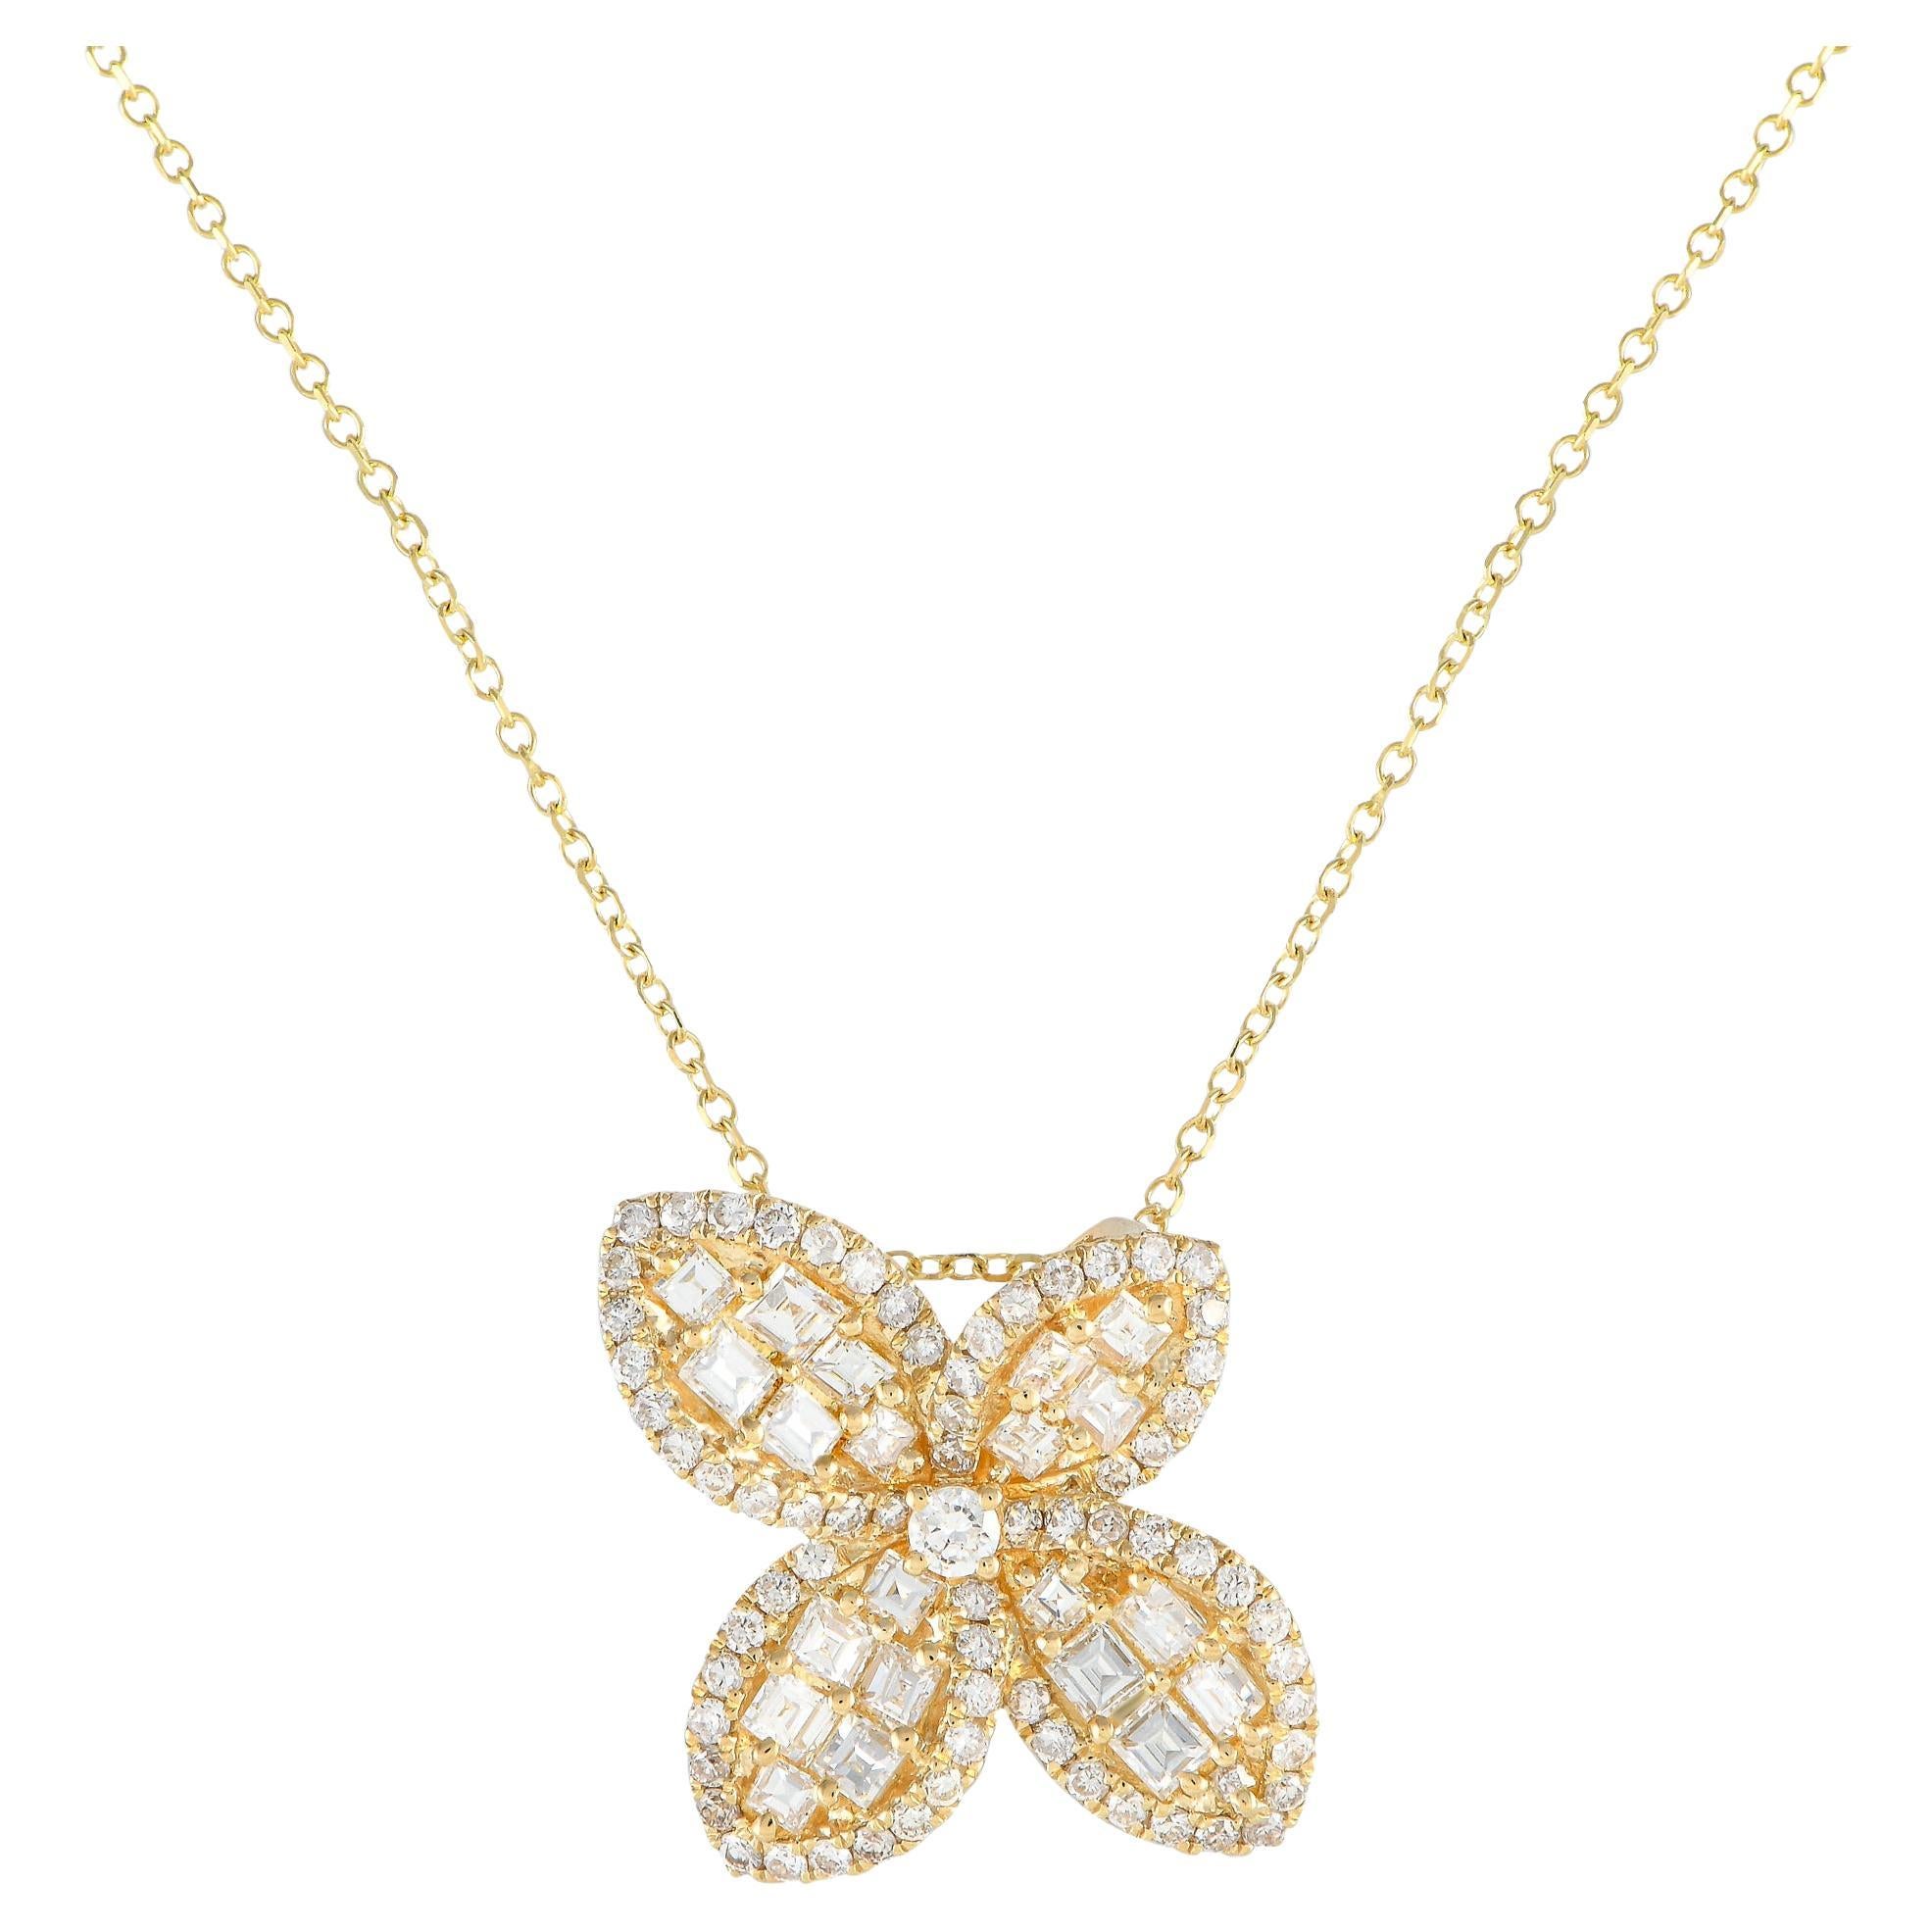 LB Exclusive 18K Yellow Gold 1.10ct Diamond Necklace For Sale